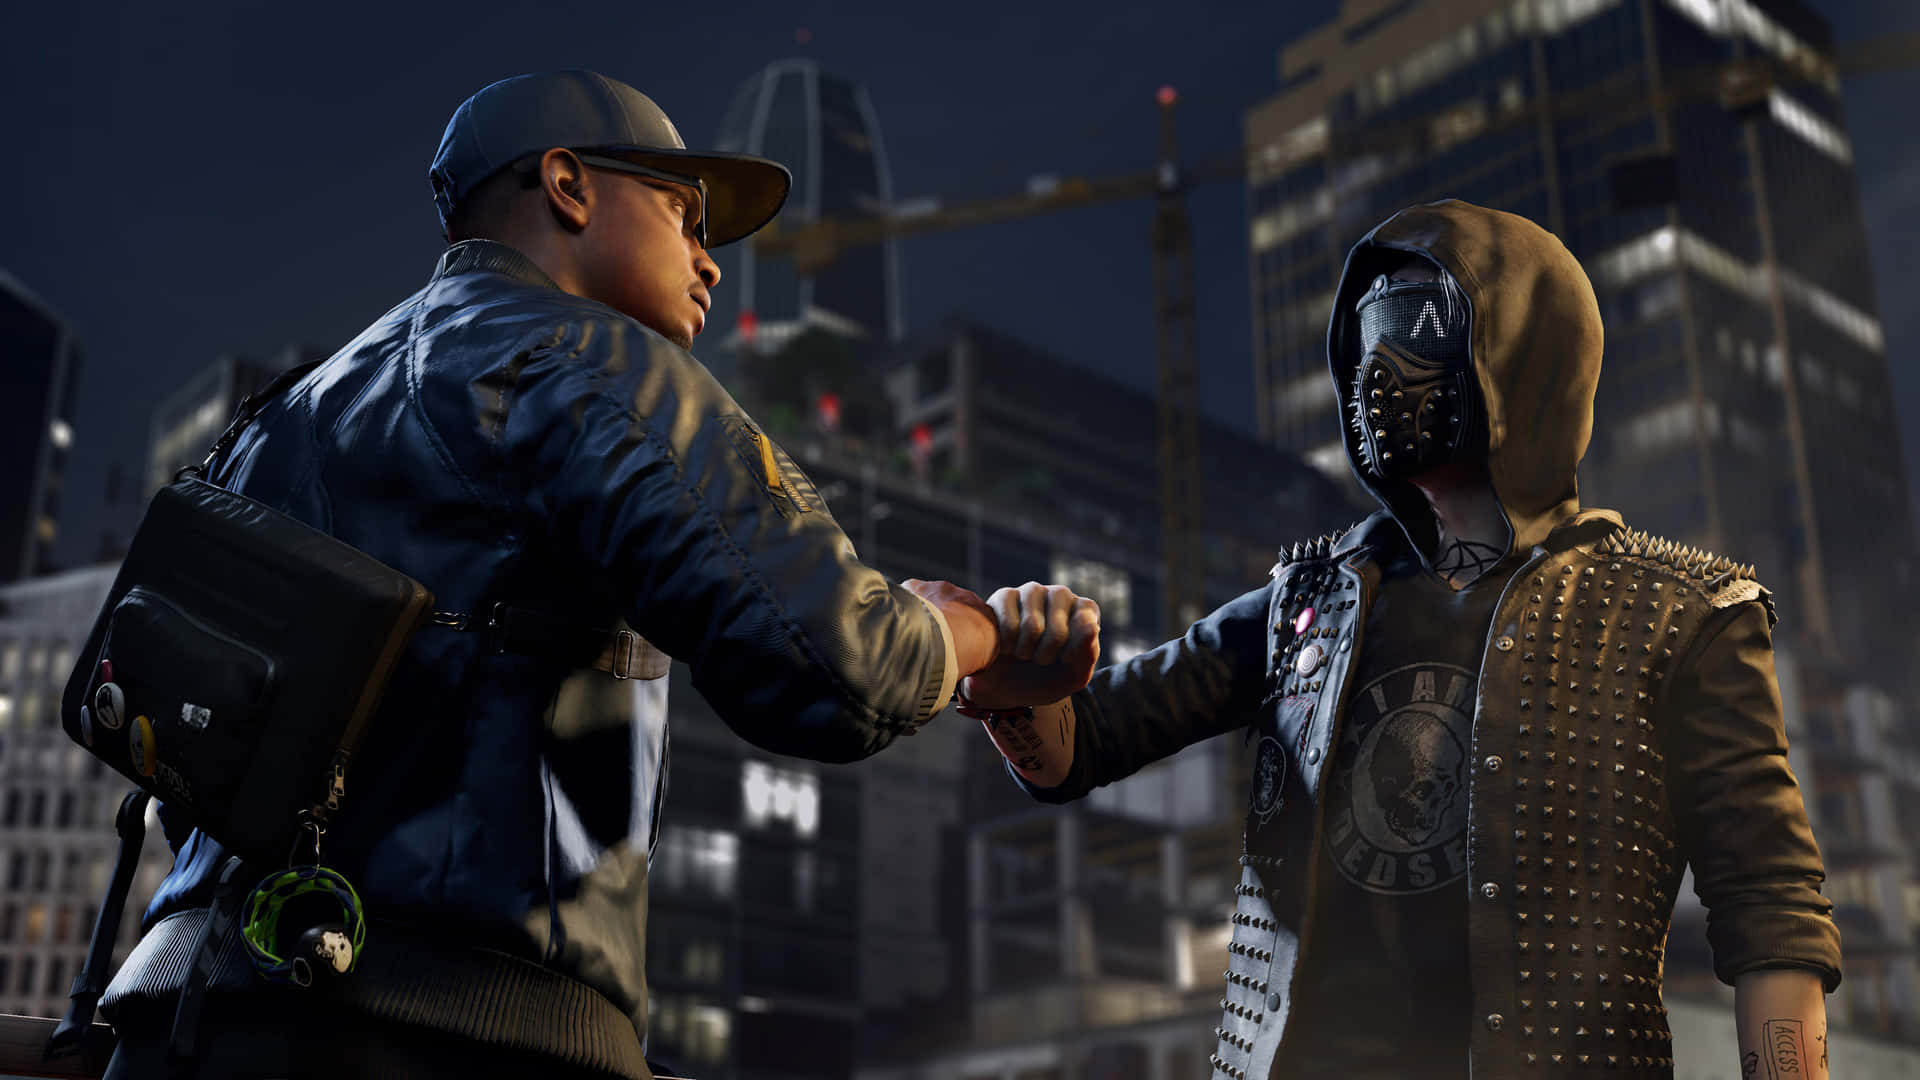 Explore the expansive San Francisco with 4K resolution in Watch Dogs 2 Wallpaper